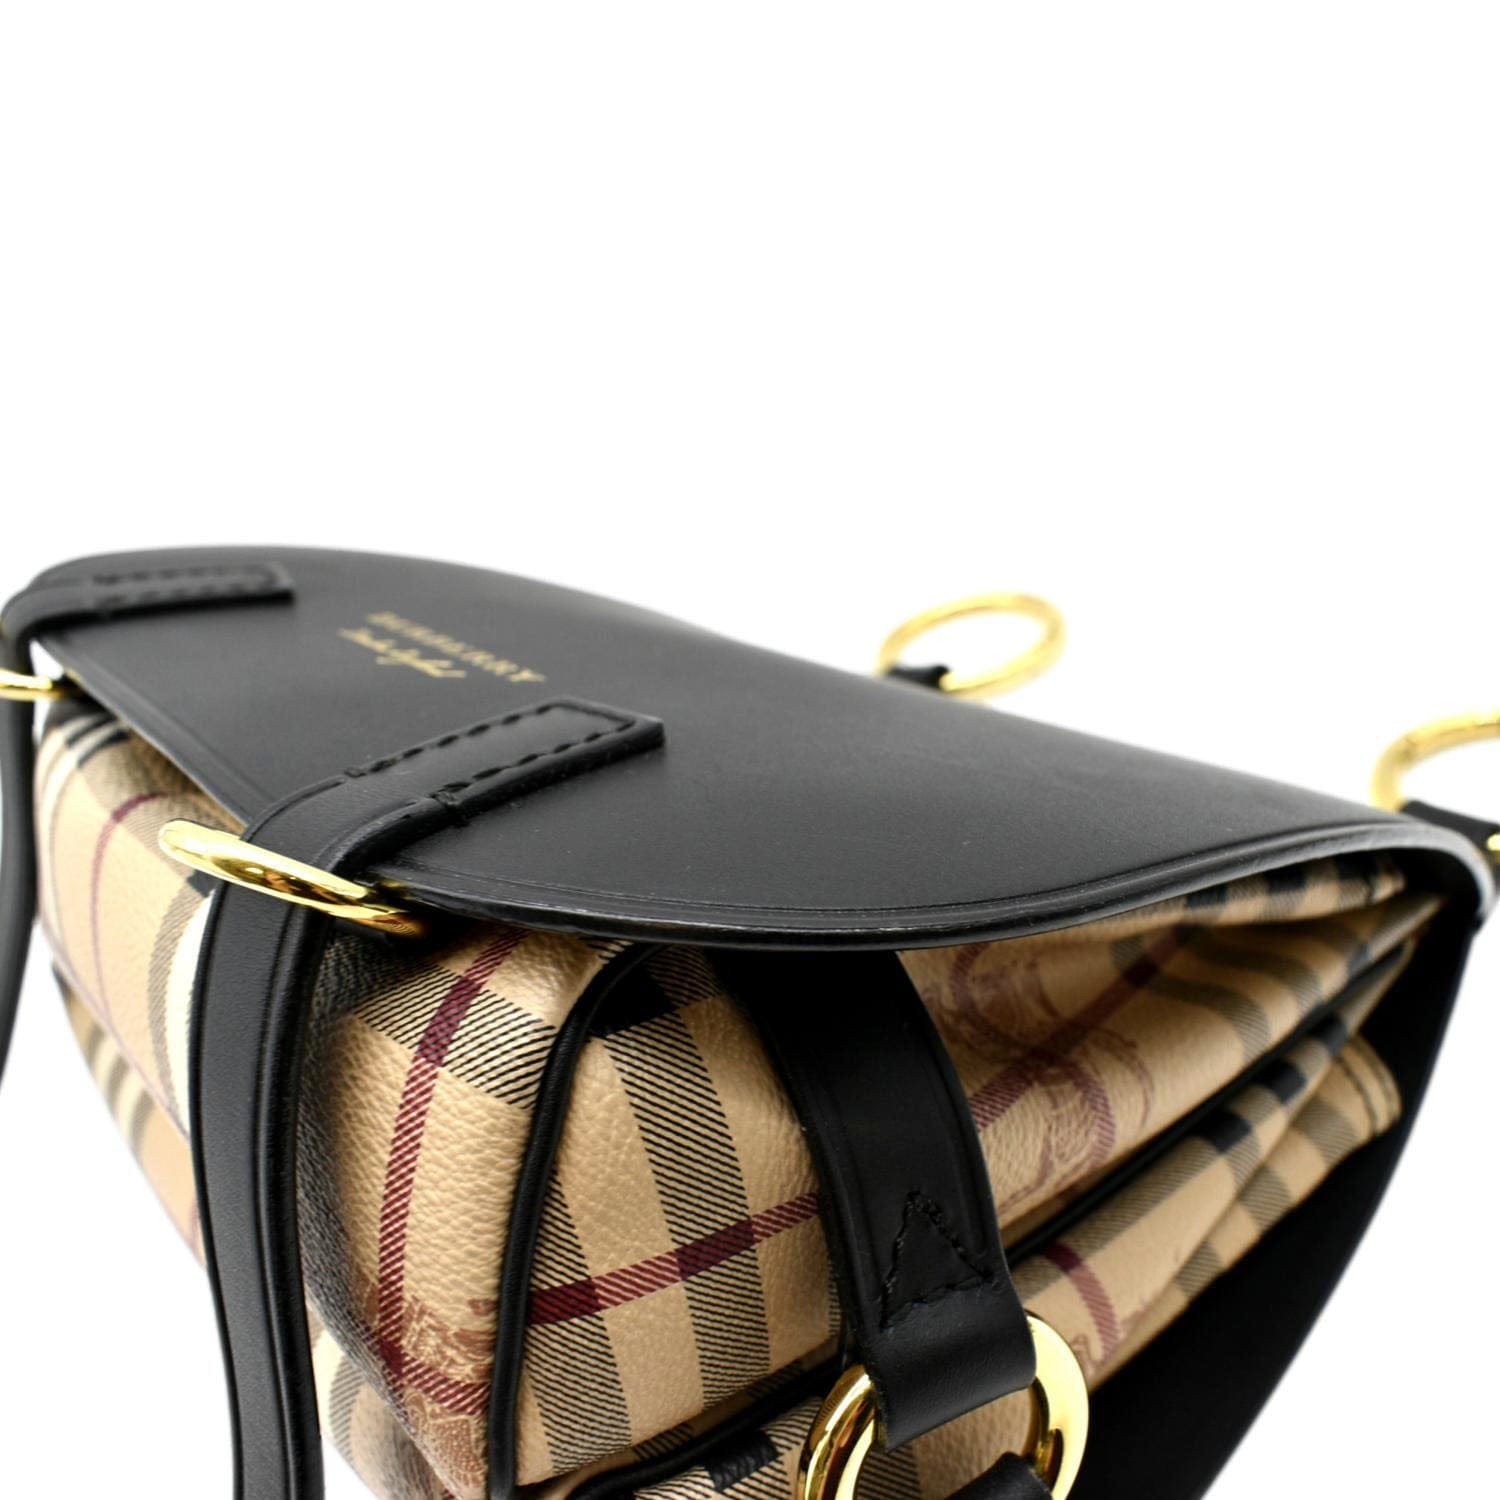 Burberry Bridle Saddle Bag Leather and Haymarket Check Coated Canvas Baby  Brown 214954179